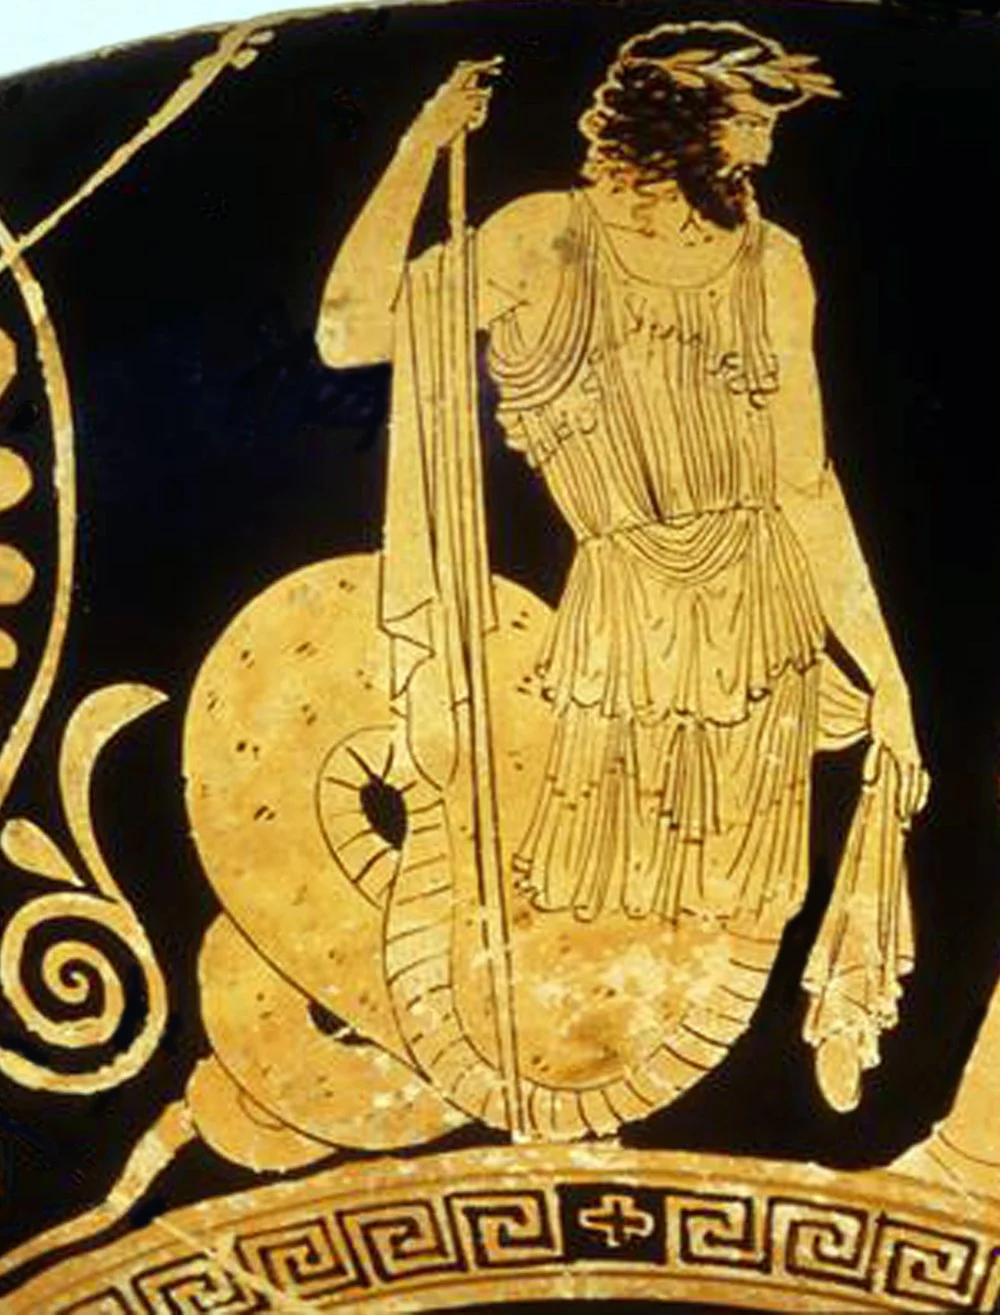 Cecrops (Ancient Greek: Κέκροψ, Kékrops; gen.: Κέκροπος) was a mythical king of Athens who is said to have reigned for fifty-six years/Alamy